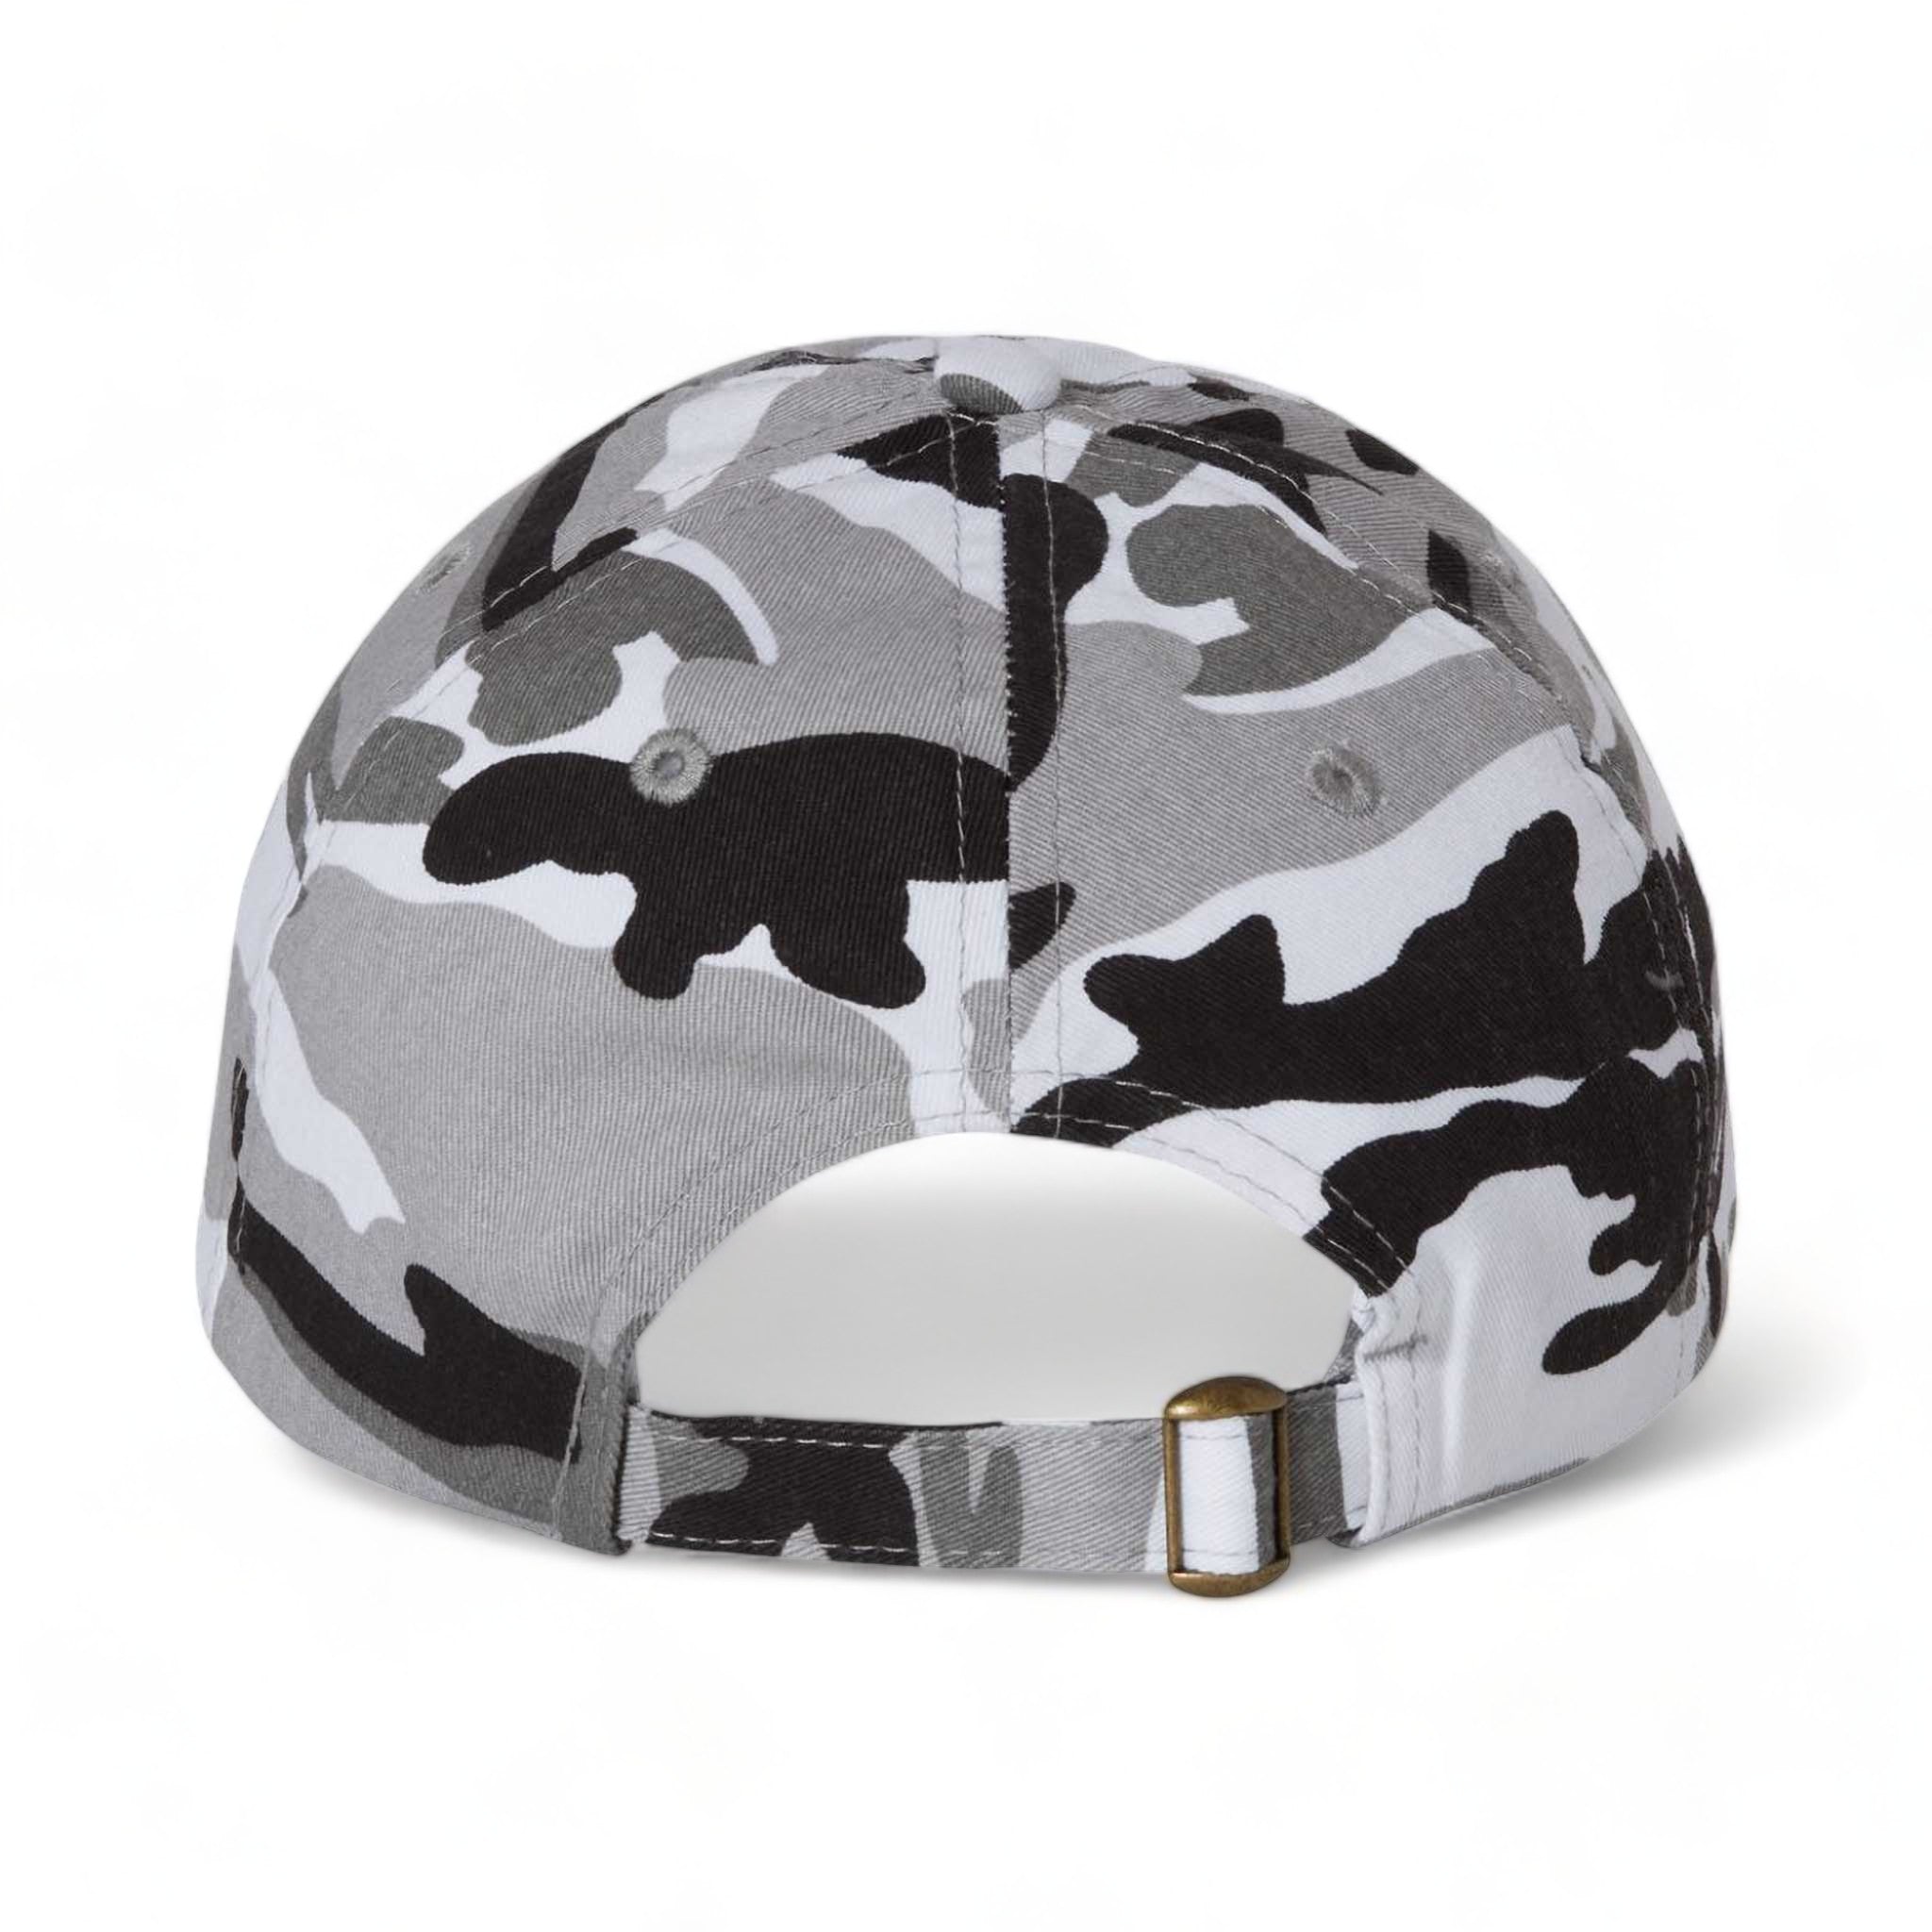 Back view of Valucap VC300A custom hat in grey camo